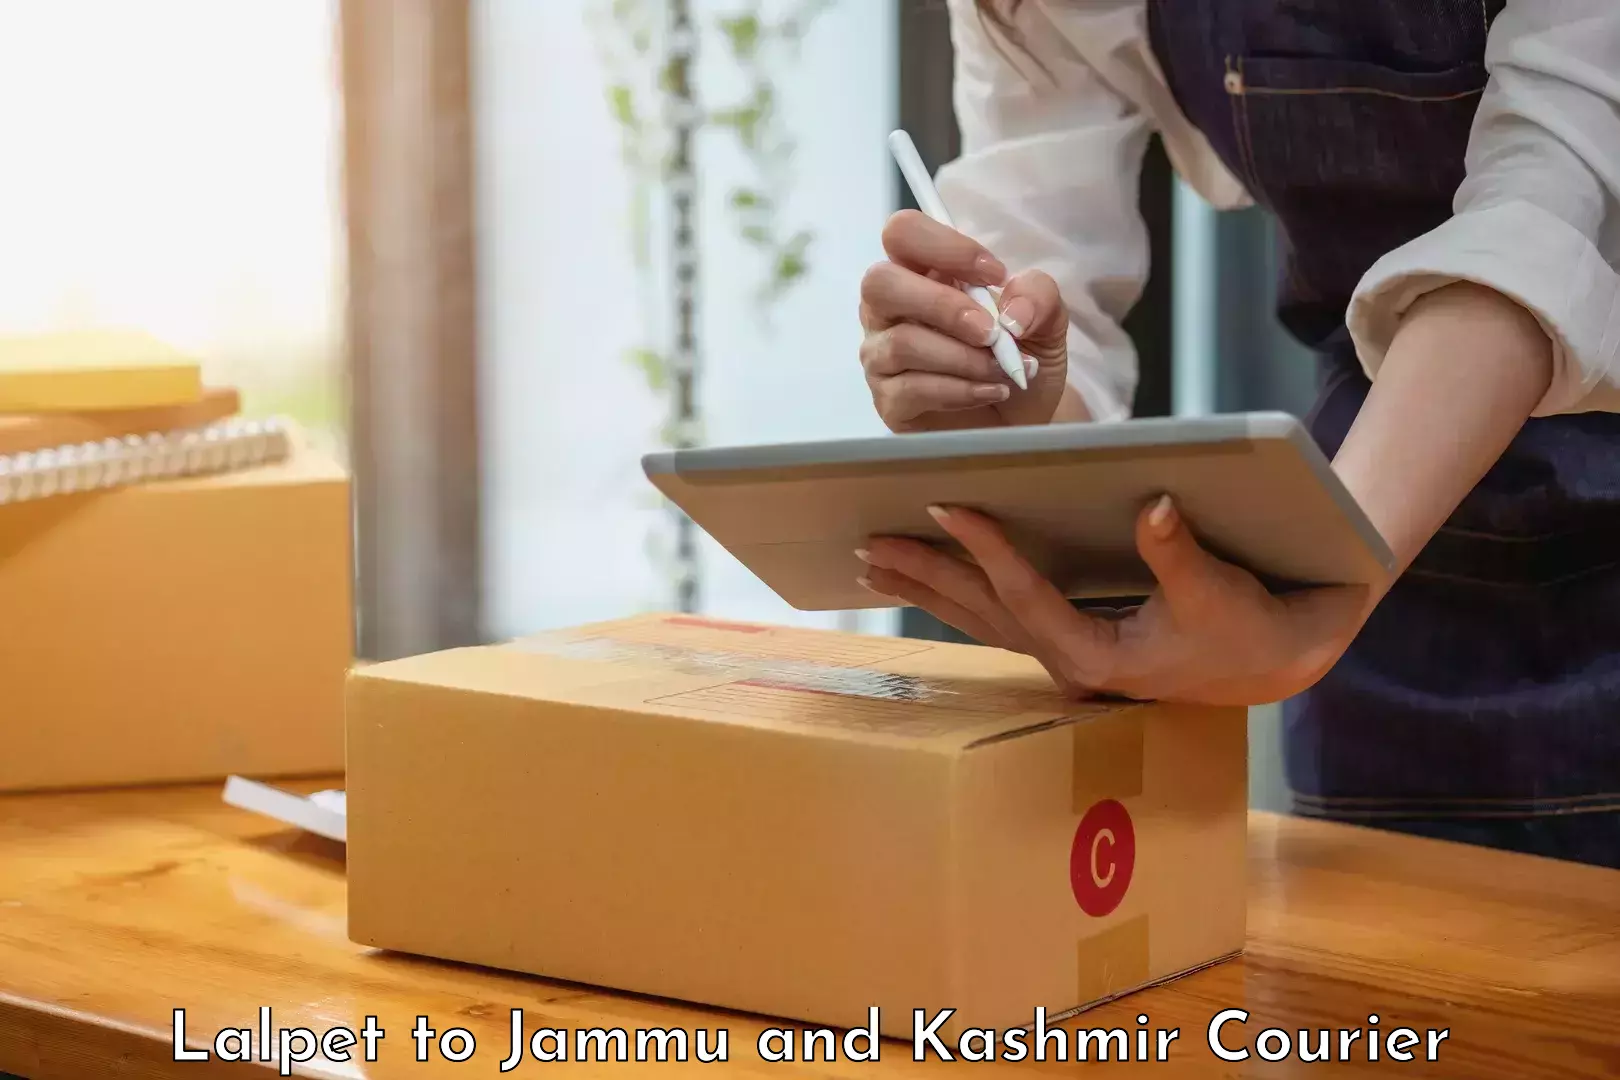 Cash on delivery service Lalpet to Jammu and Kashmir